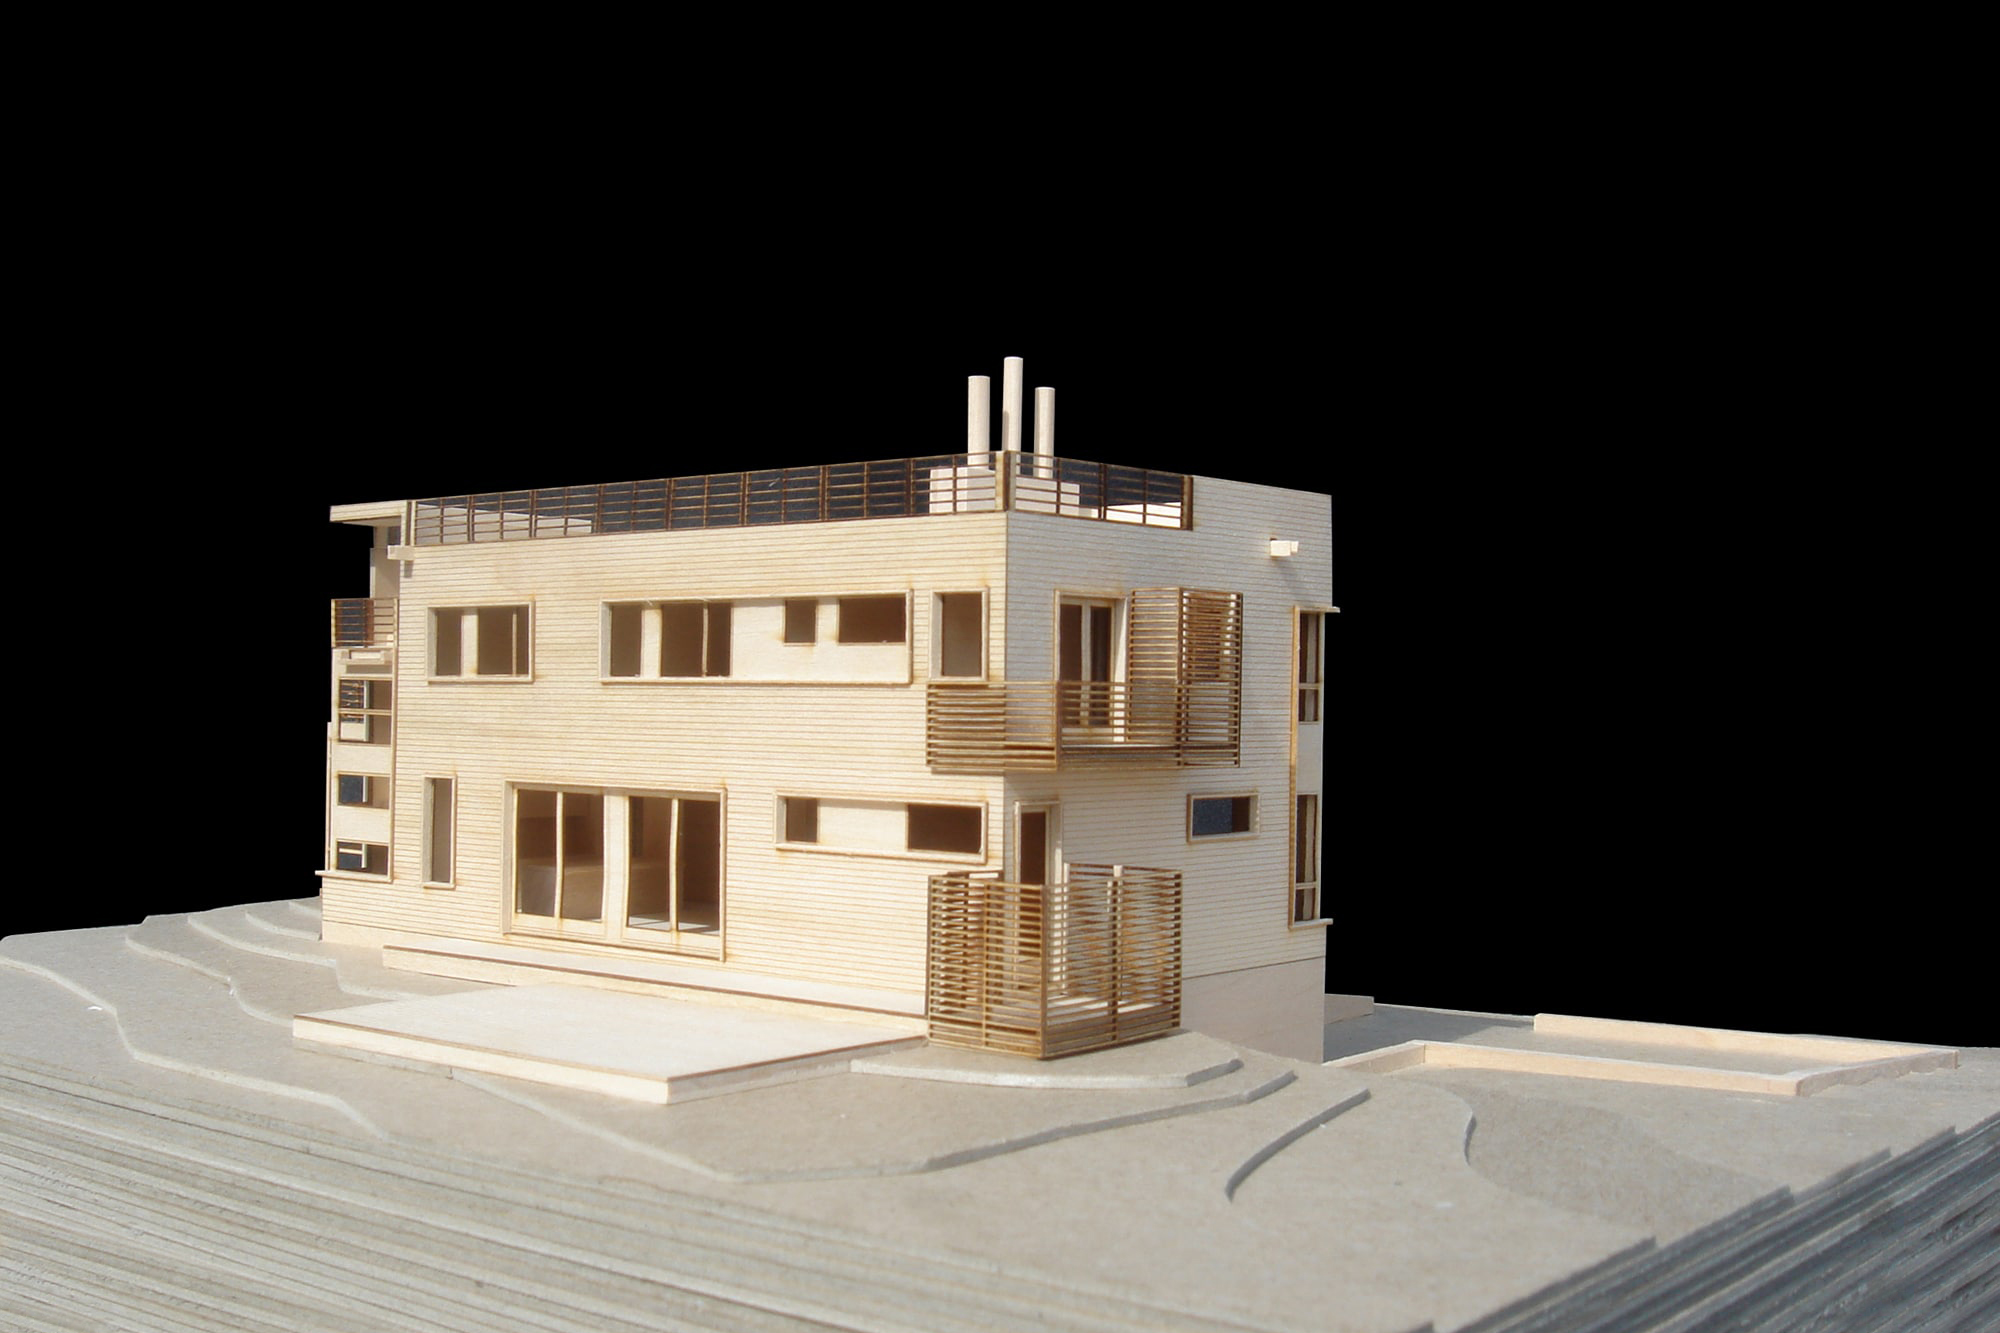 res4-resolution-4-architecture-cape house-model-01.jpg